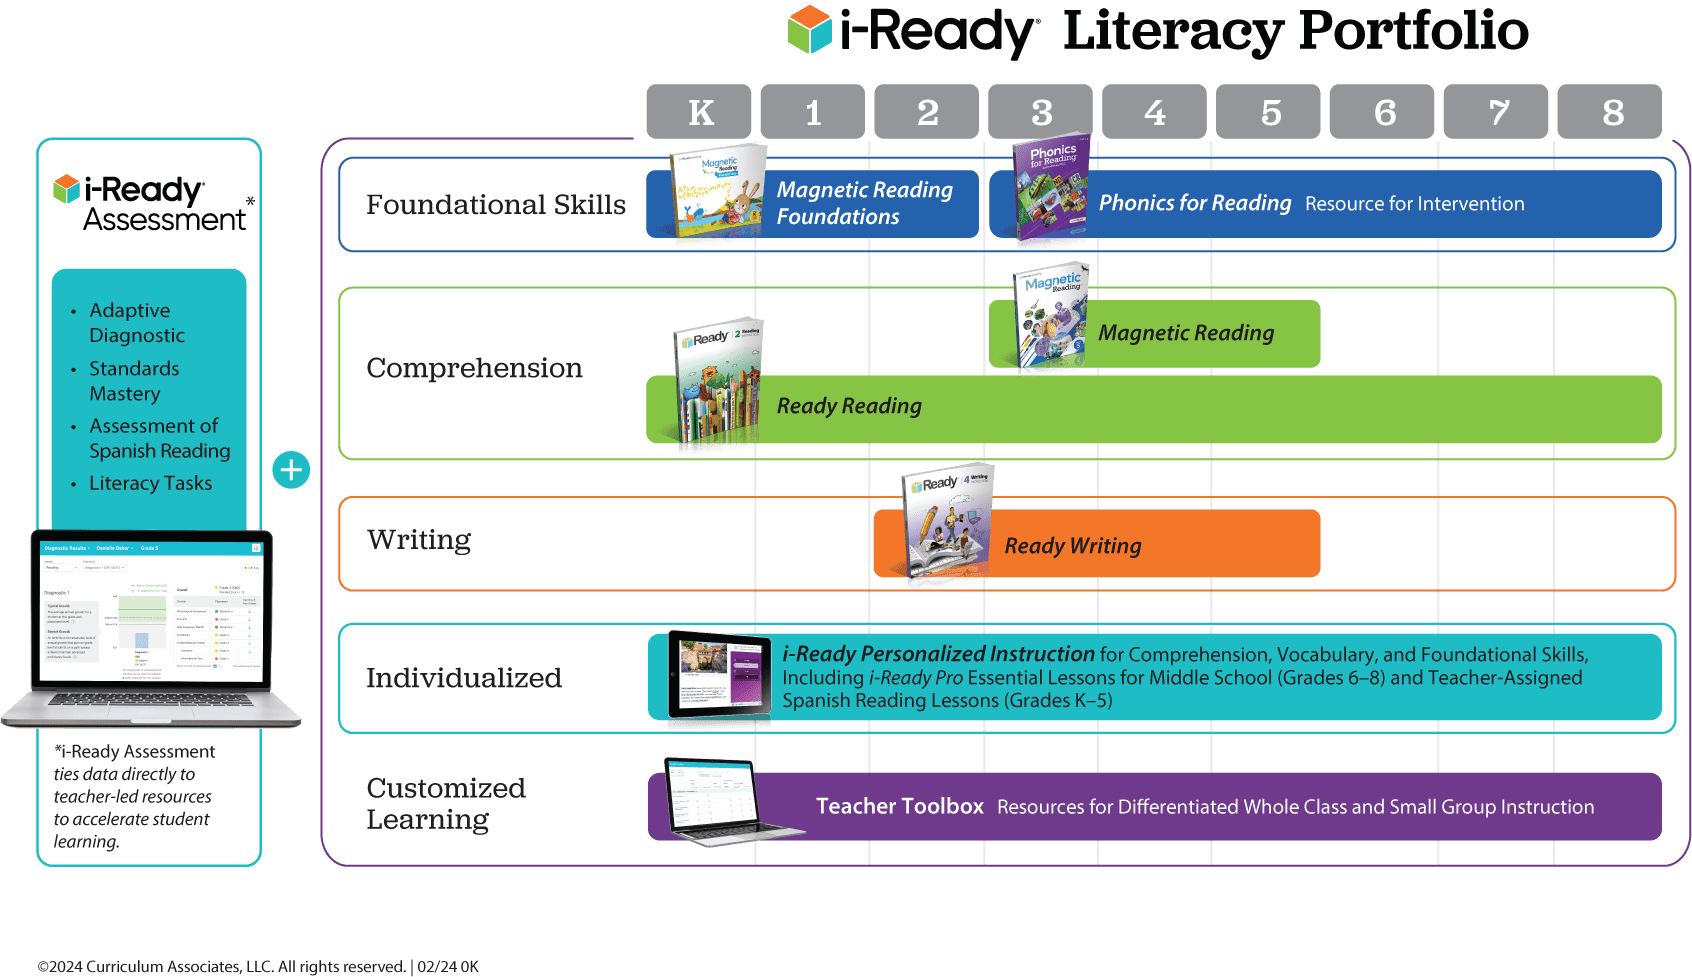 i-Ready assessment connects with i-Ready literacy products across grade levels and needs.